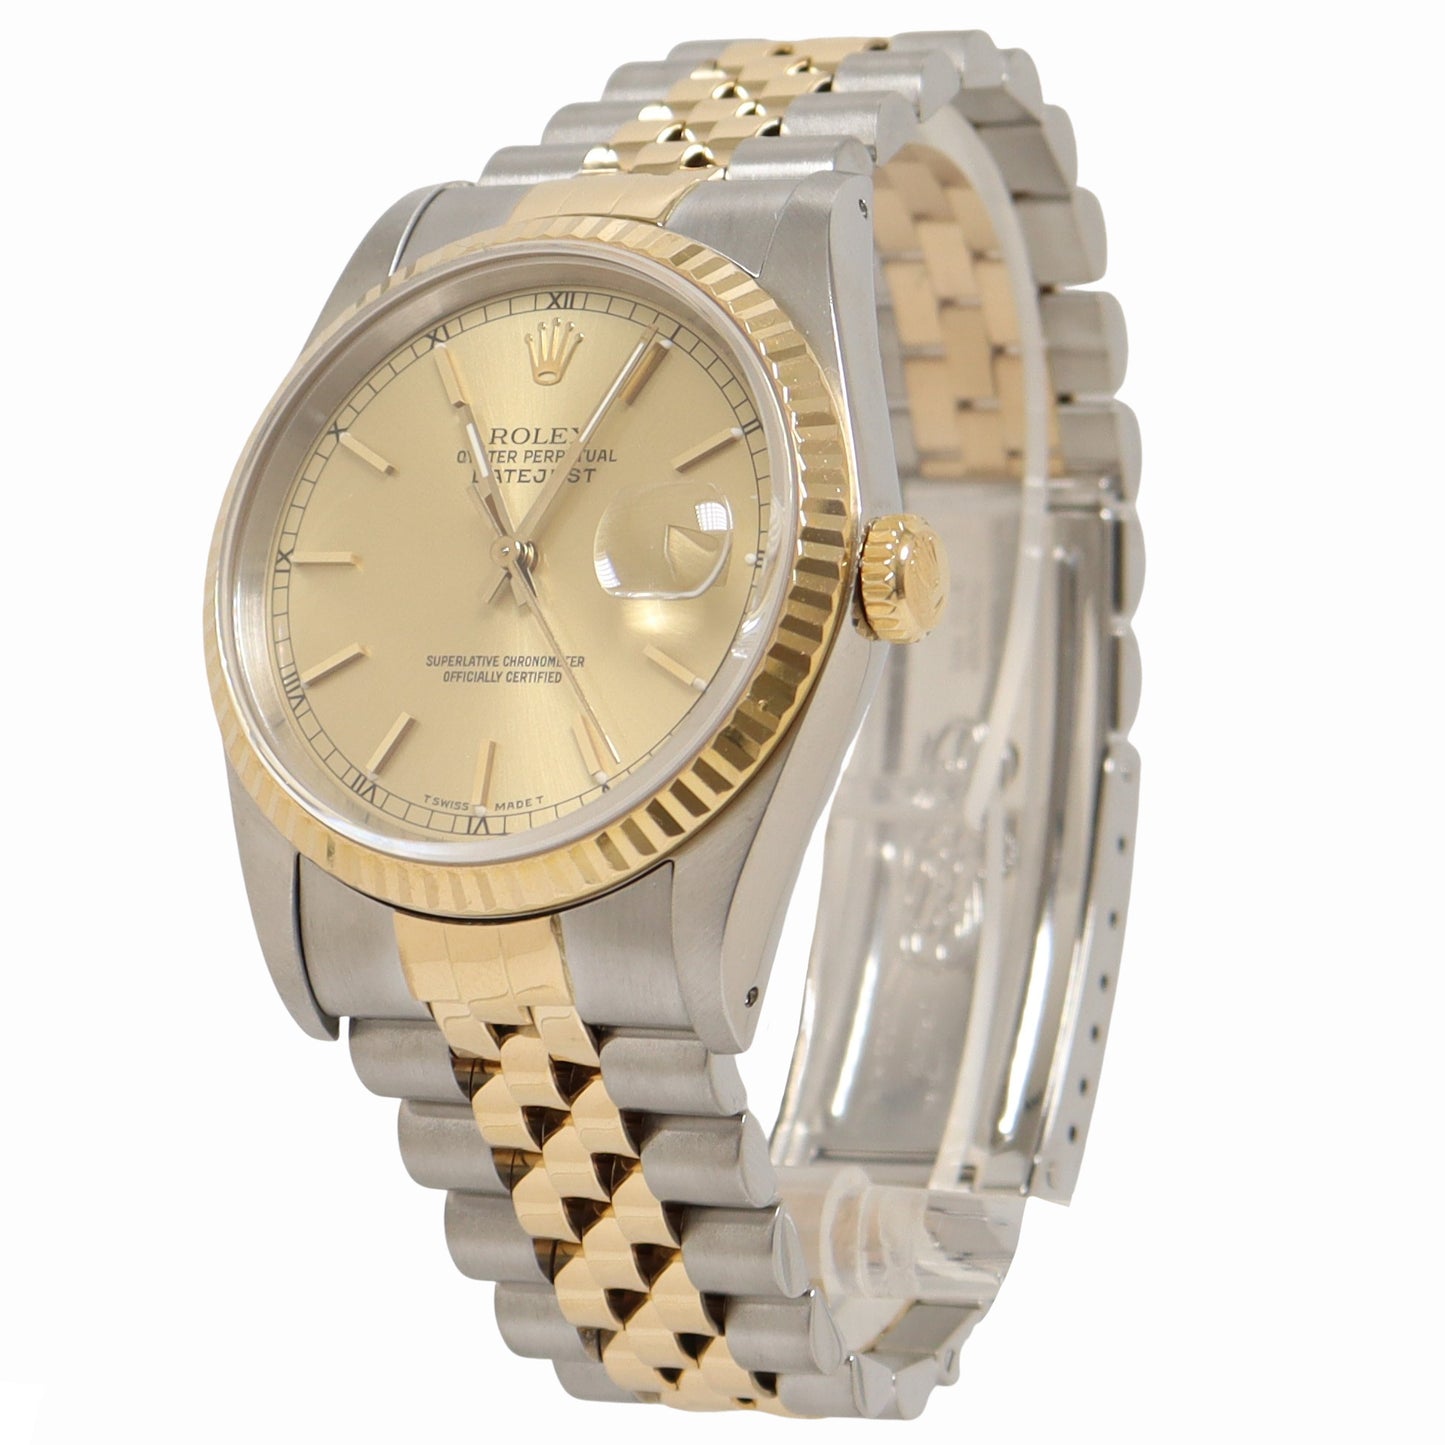 Rolex Datejust Two-Tone Stainless Steel & Yellow Gold 36mm Champagne Stick Dial Watch Reference #: 16233 - Happy Jewelers Fine Jewelry Lifetime Warranty